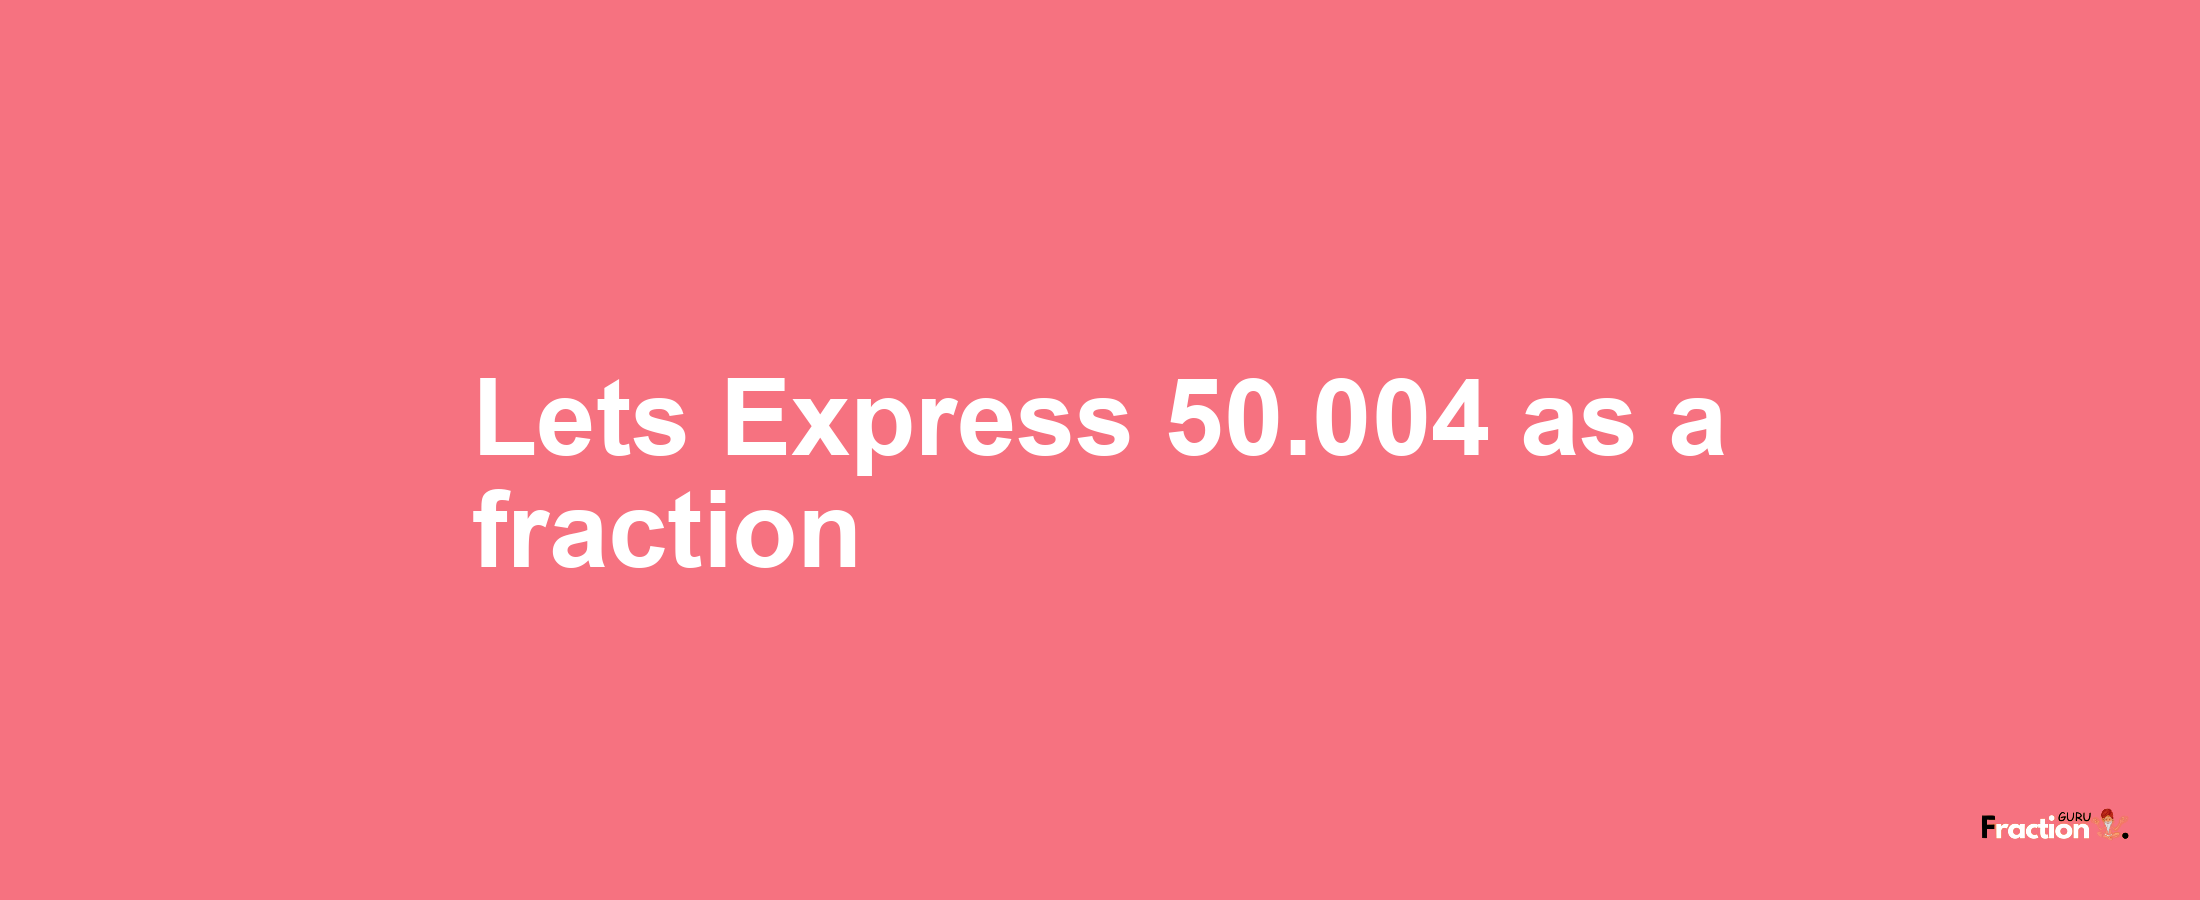 Lets Express 50.004 as afraction